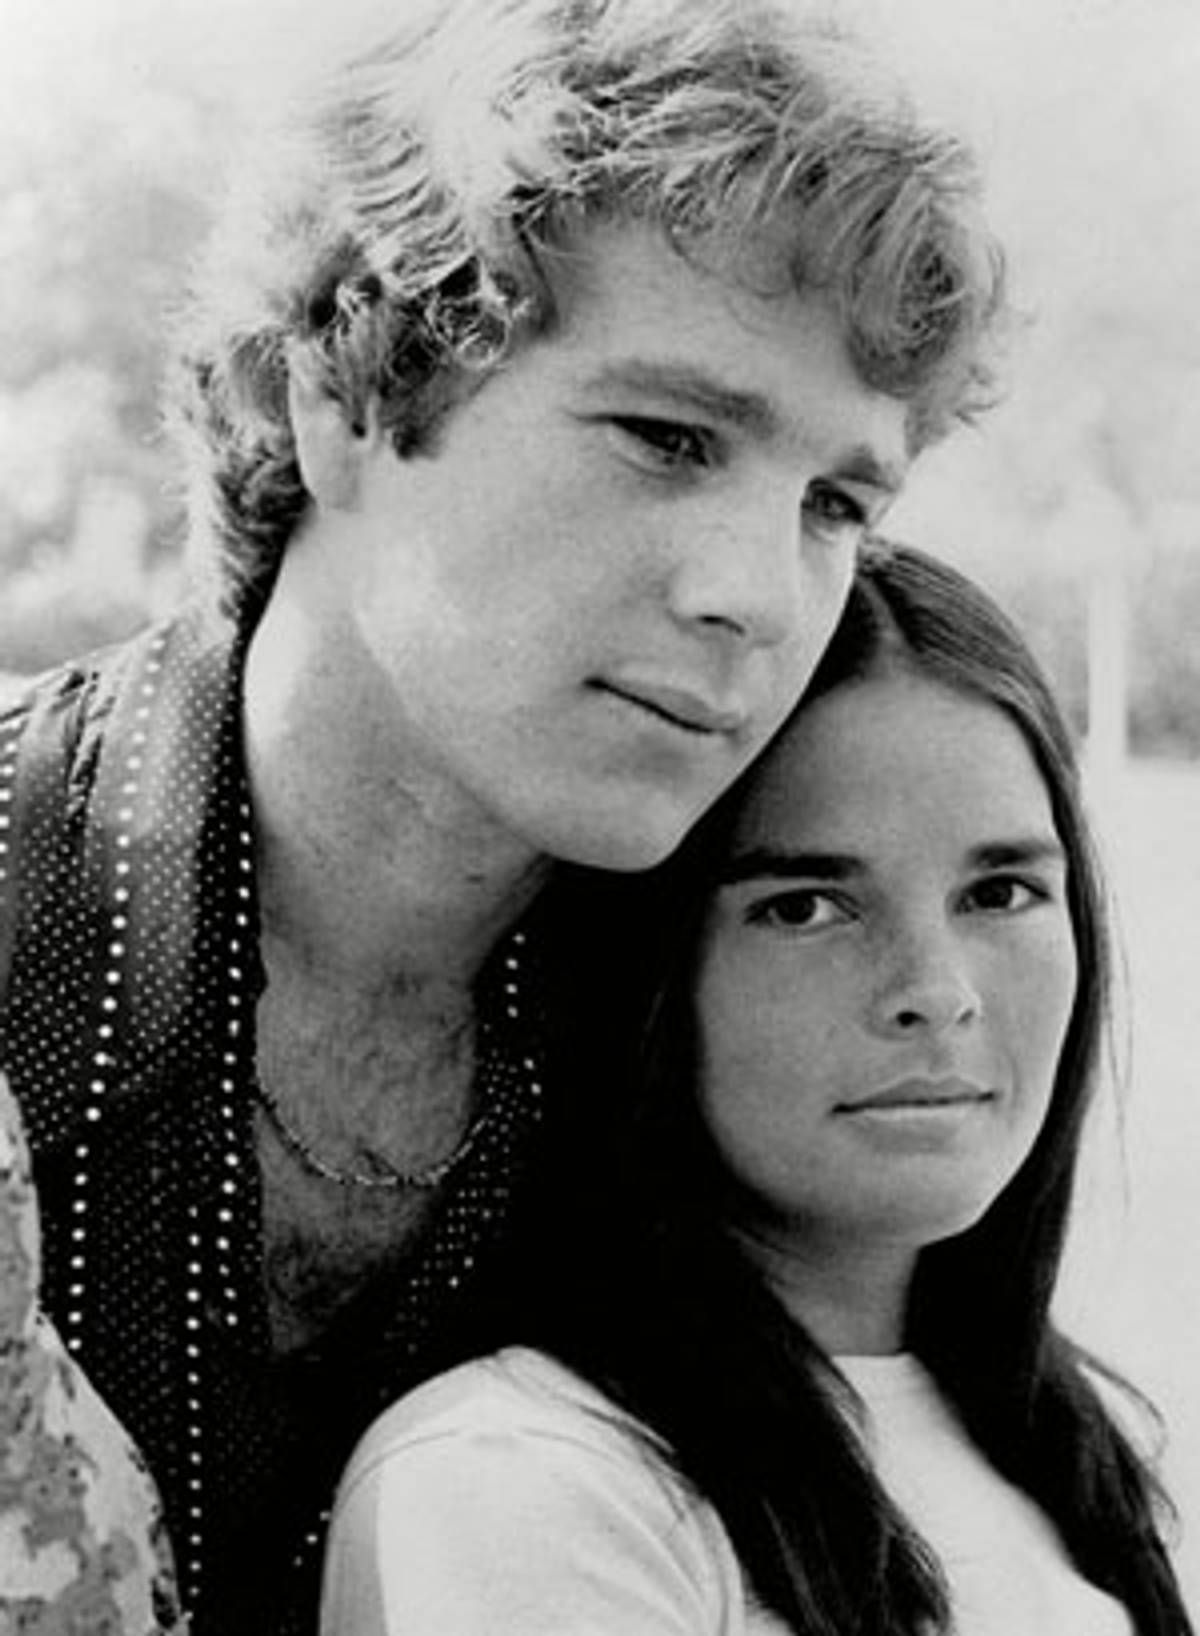 Ryan O’Neal and Ali MacGraw in ‘Love Story.’ (Photo: Paramount Pictures)